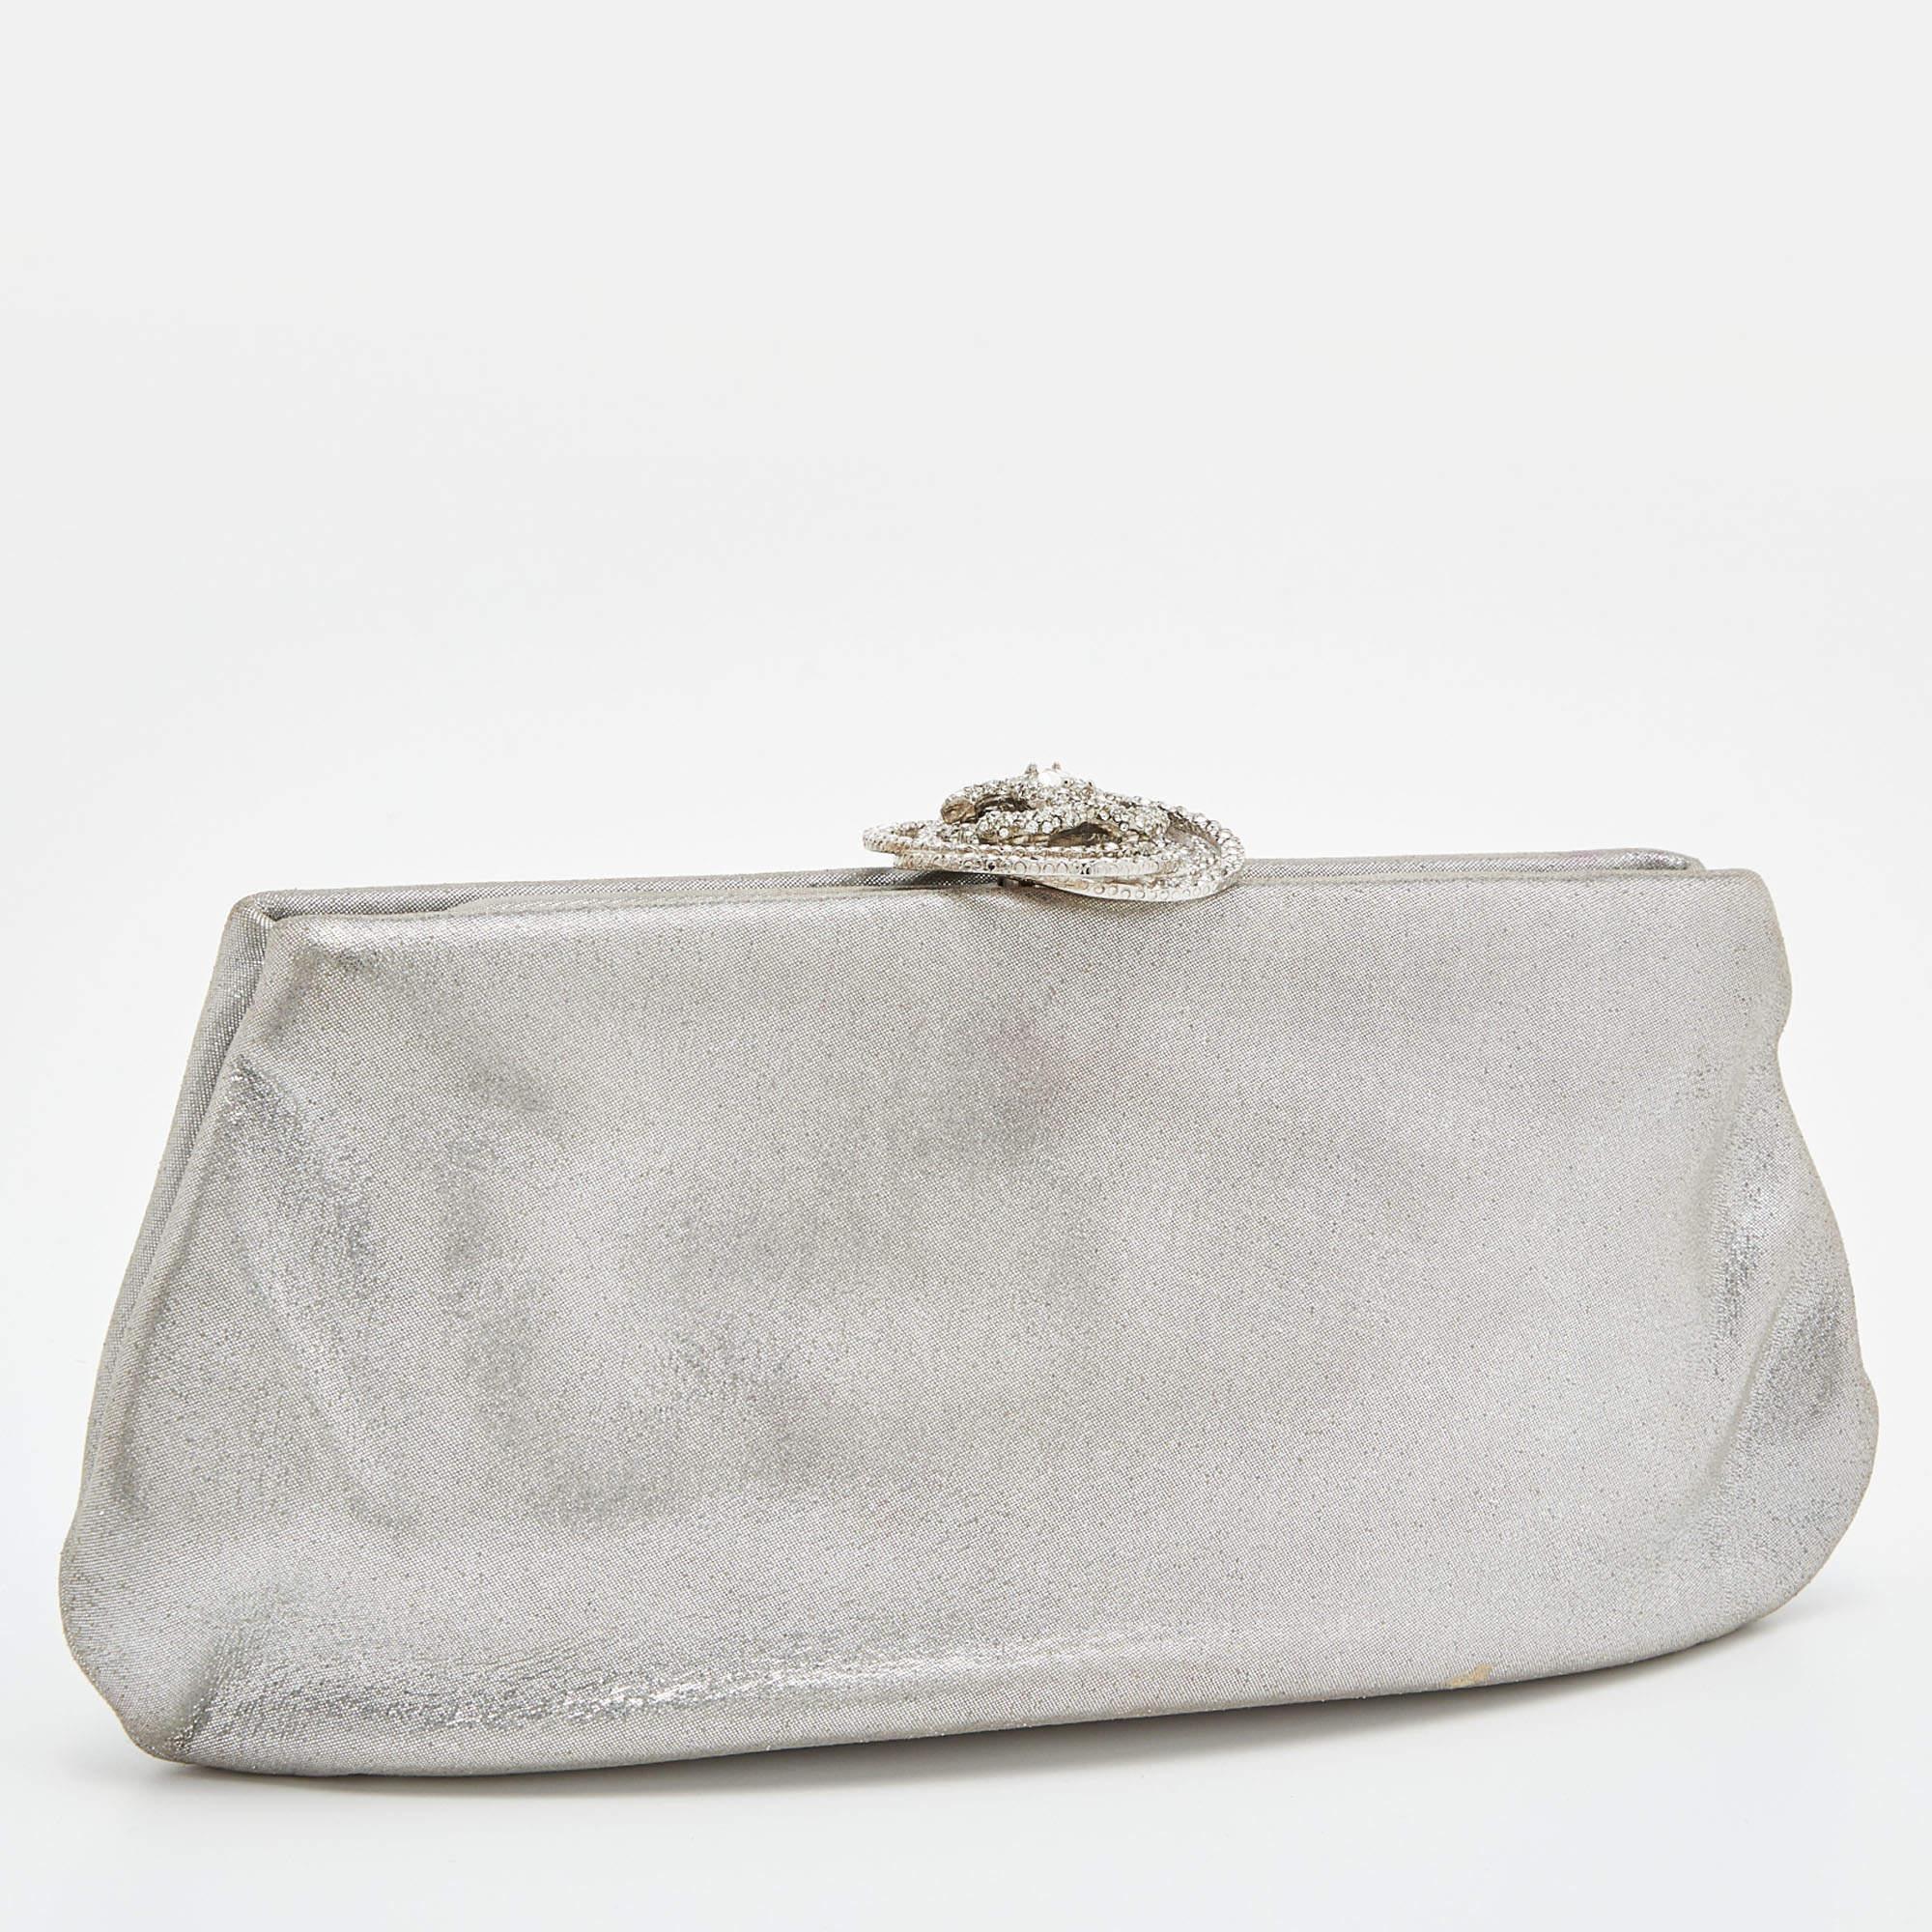 Women's Chanel Silver Iridescent Leather Crystal Camellia Clutch